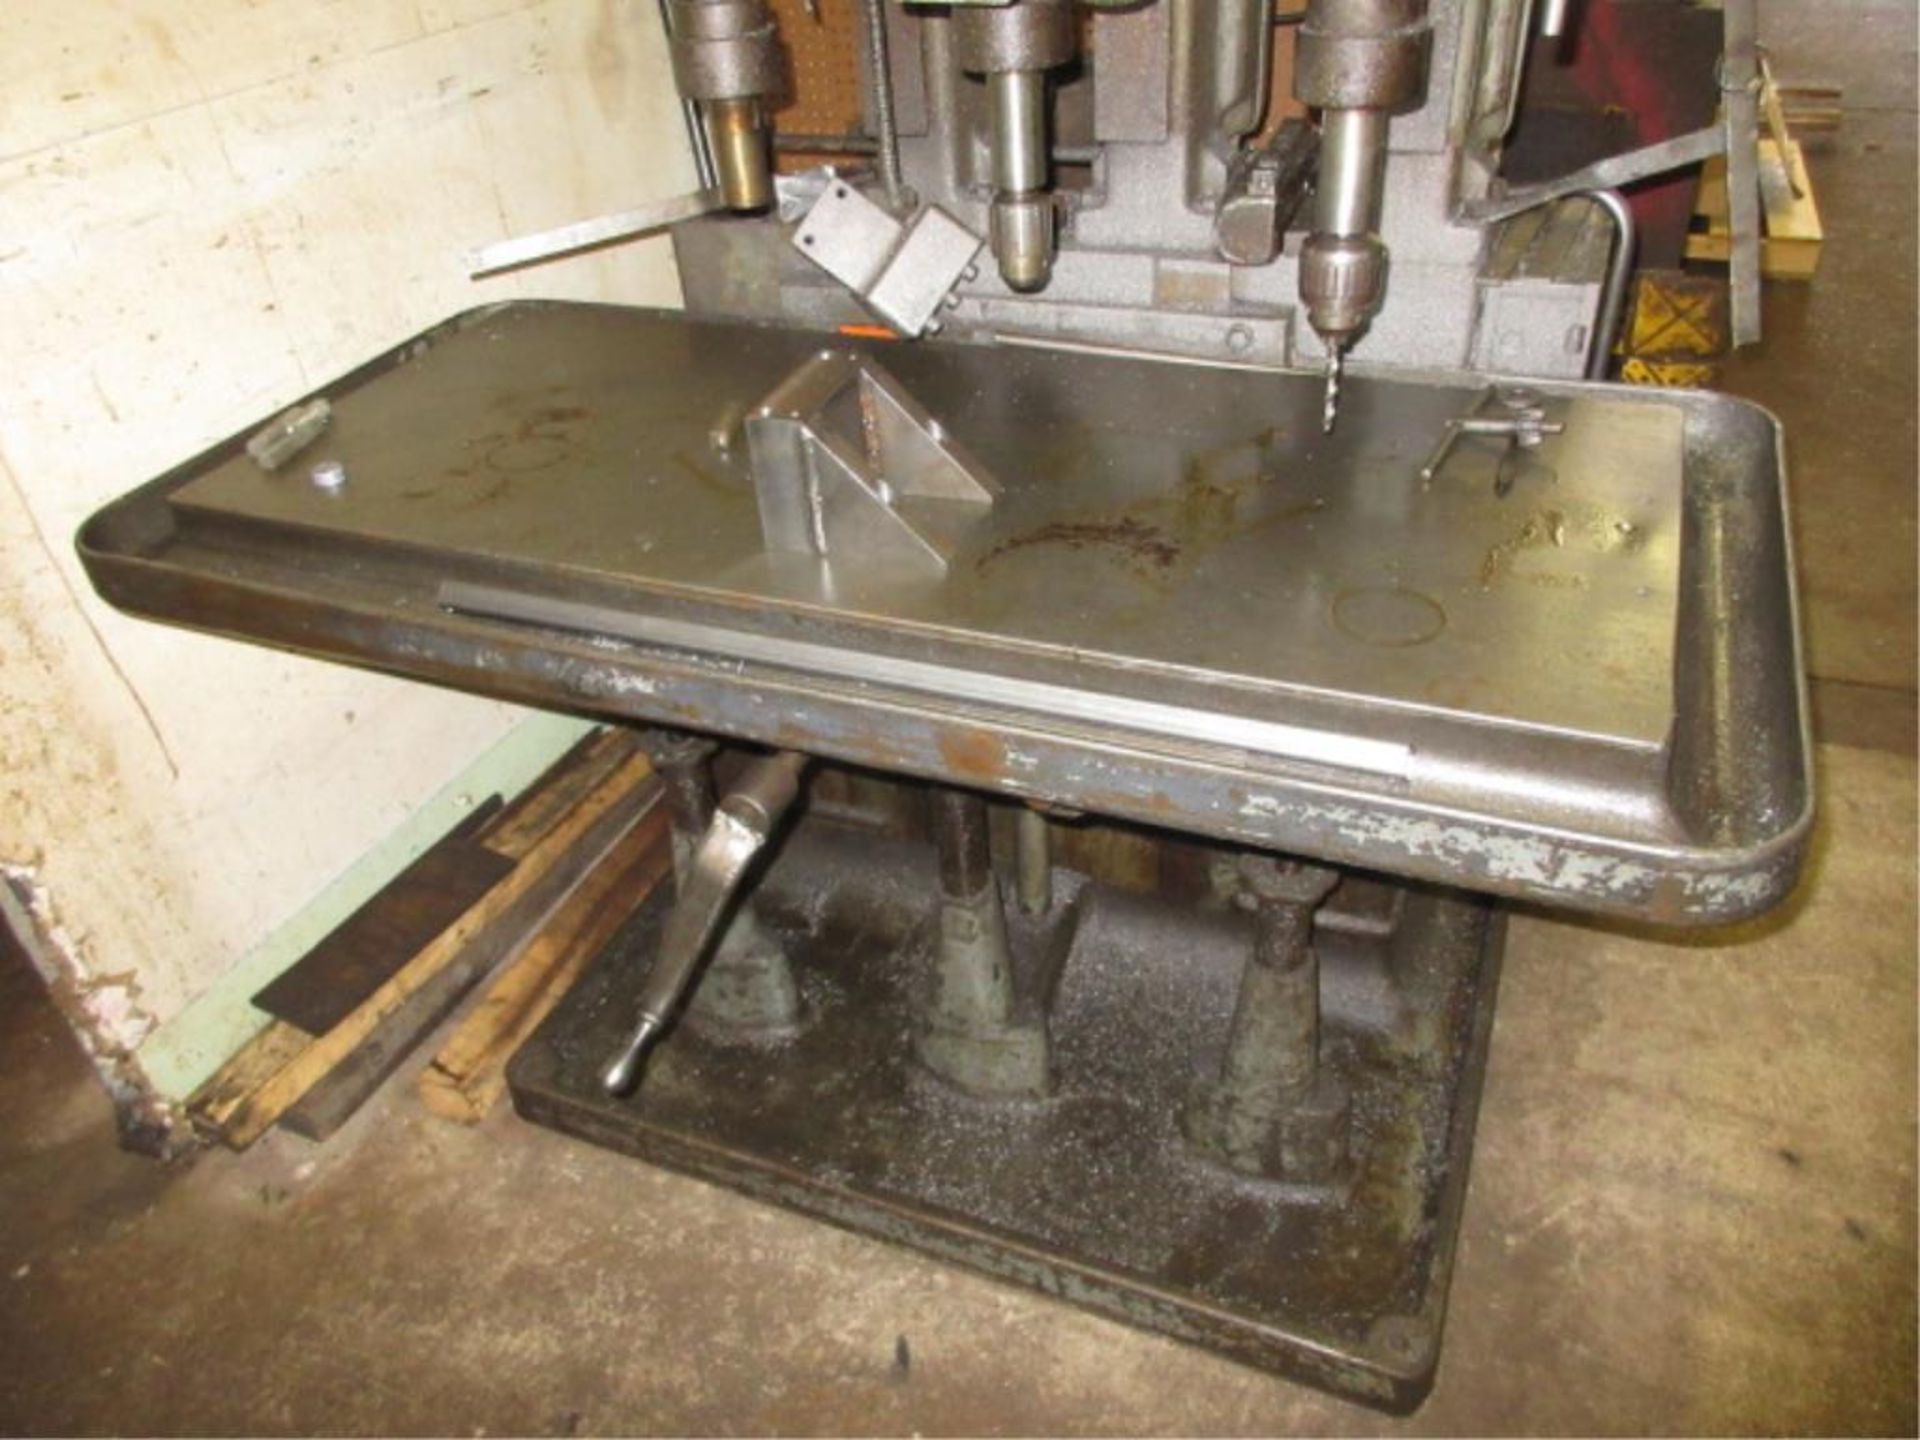 Avey Gang Drill. Avey 3-Head Gang Drill, table size 52" x 22", 440VAC. Asset# 1042. HIT# 2160195. - Image 4 of 5